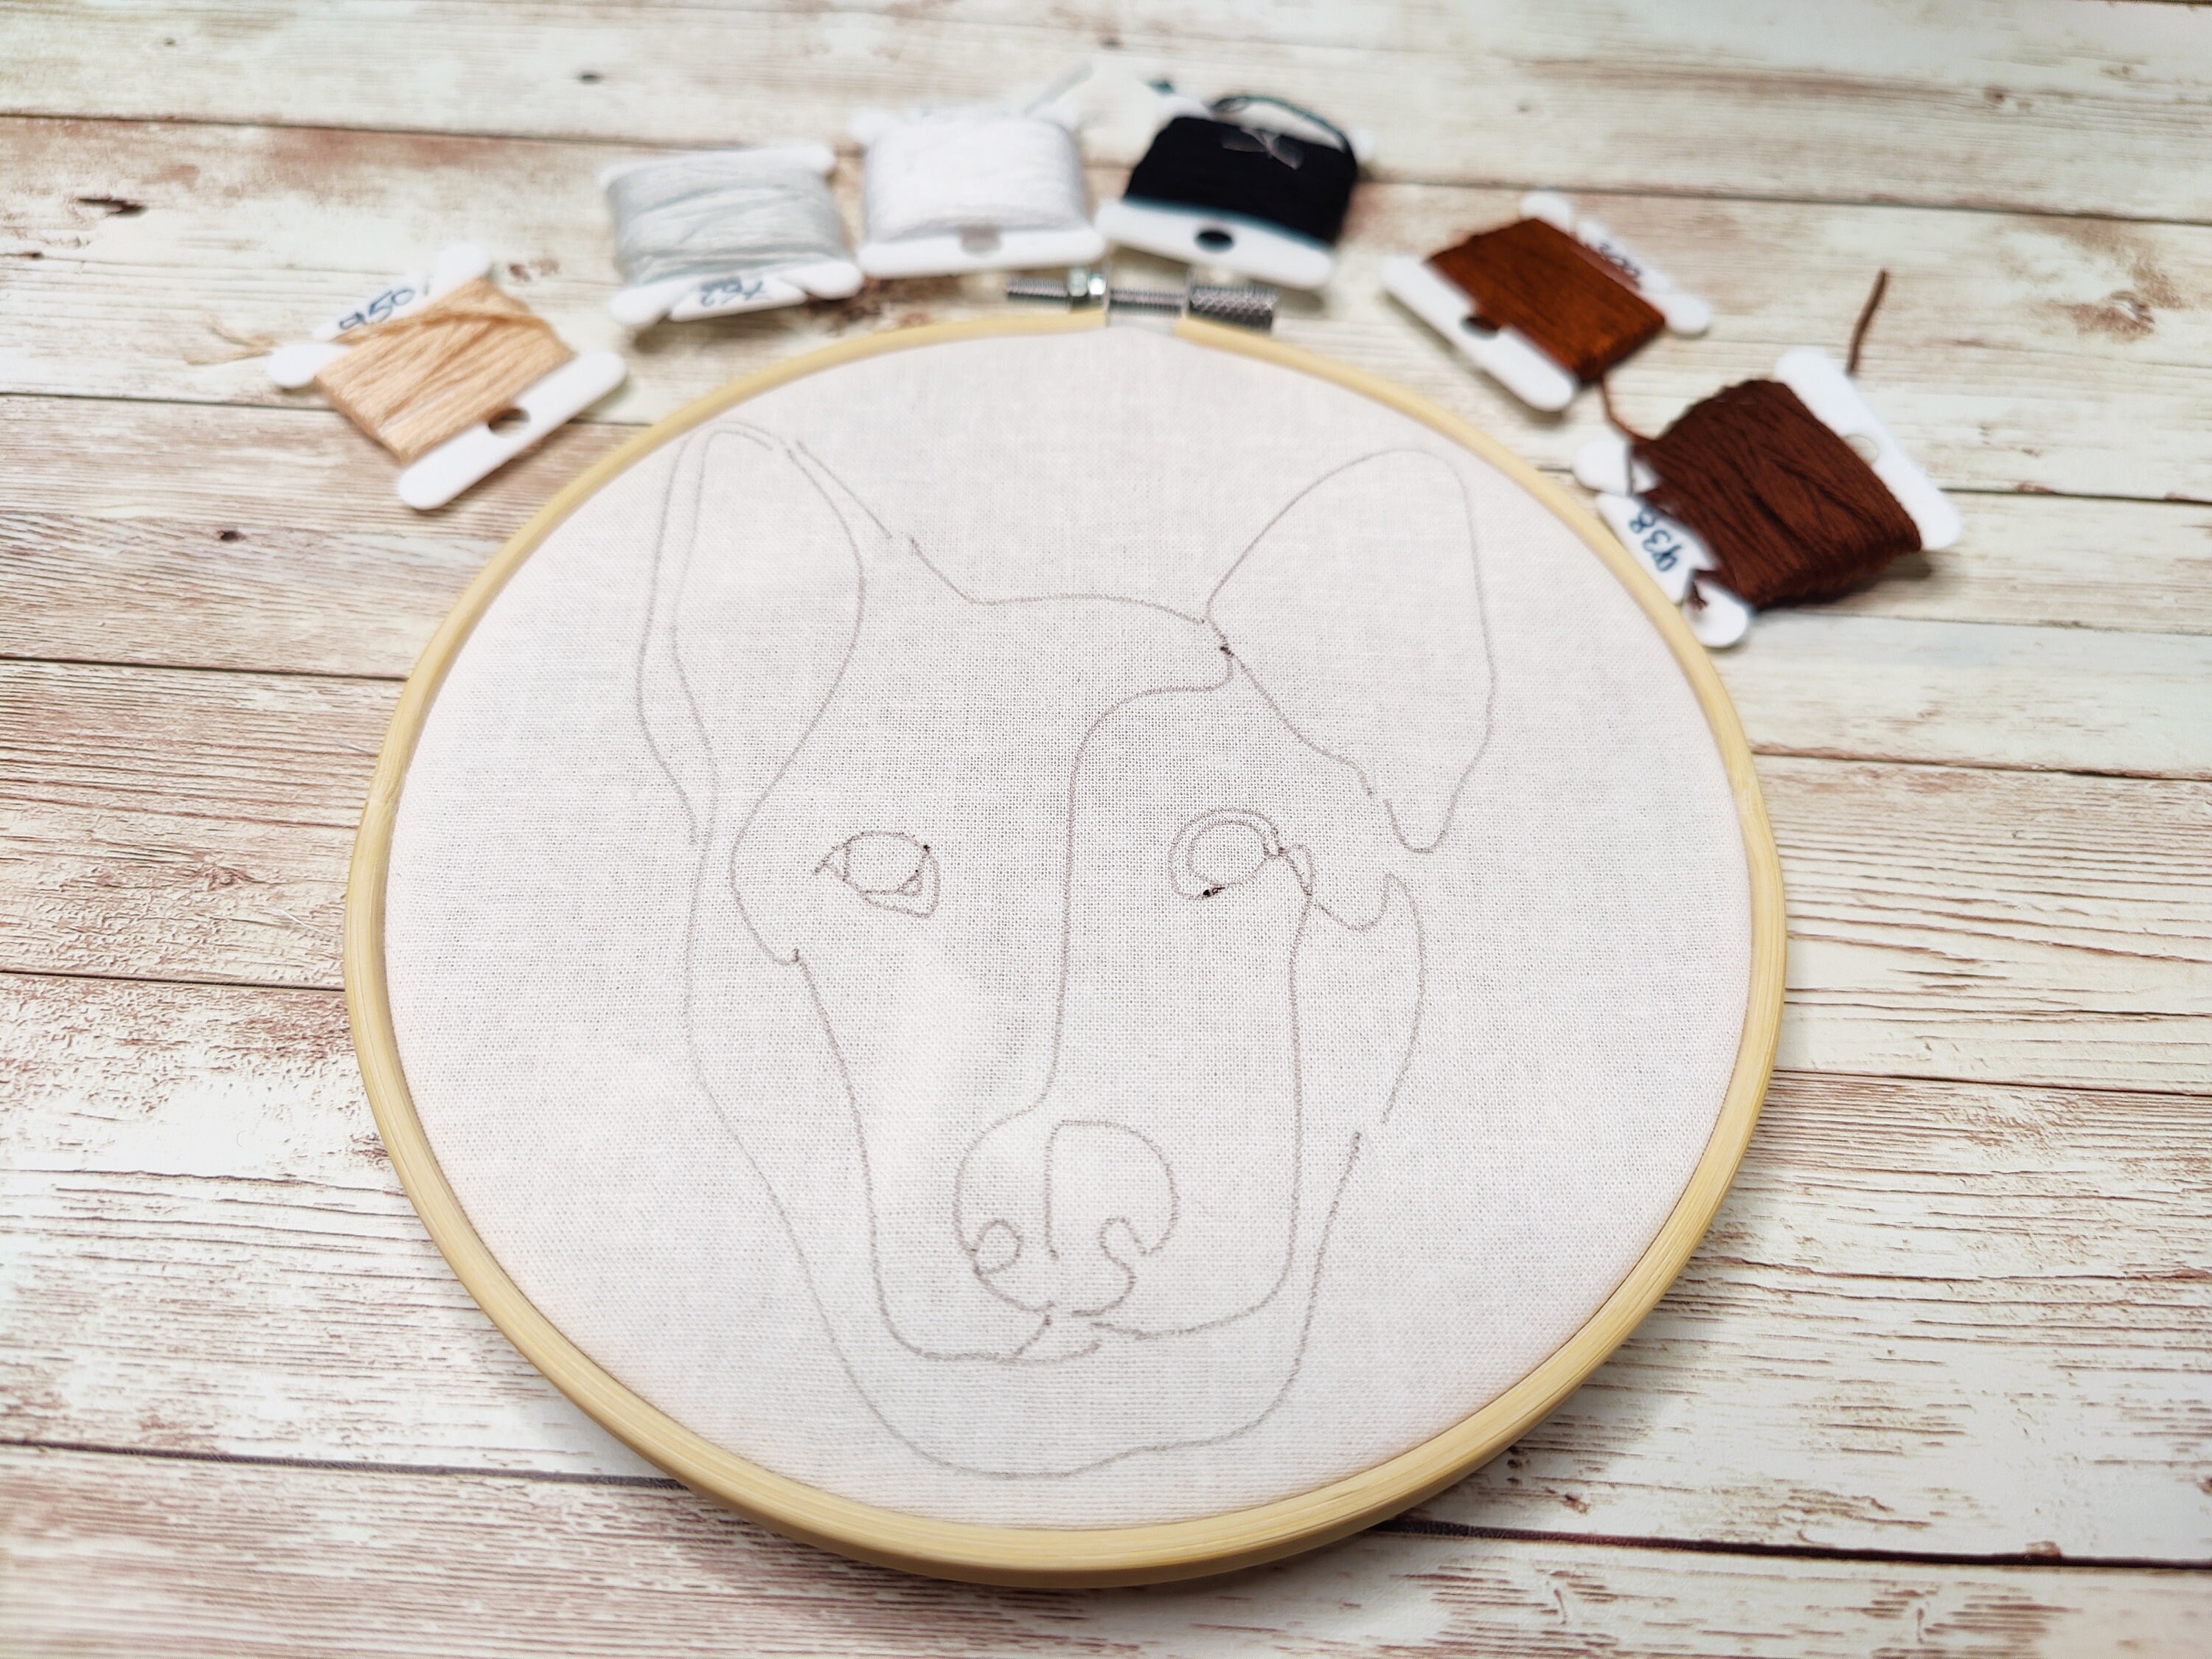 Embroidery Kit for Beginners, Pre Printed Embroidery Kit for